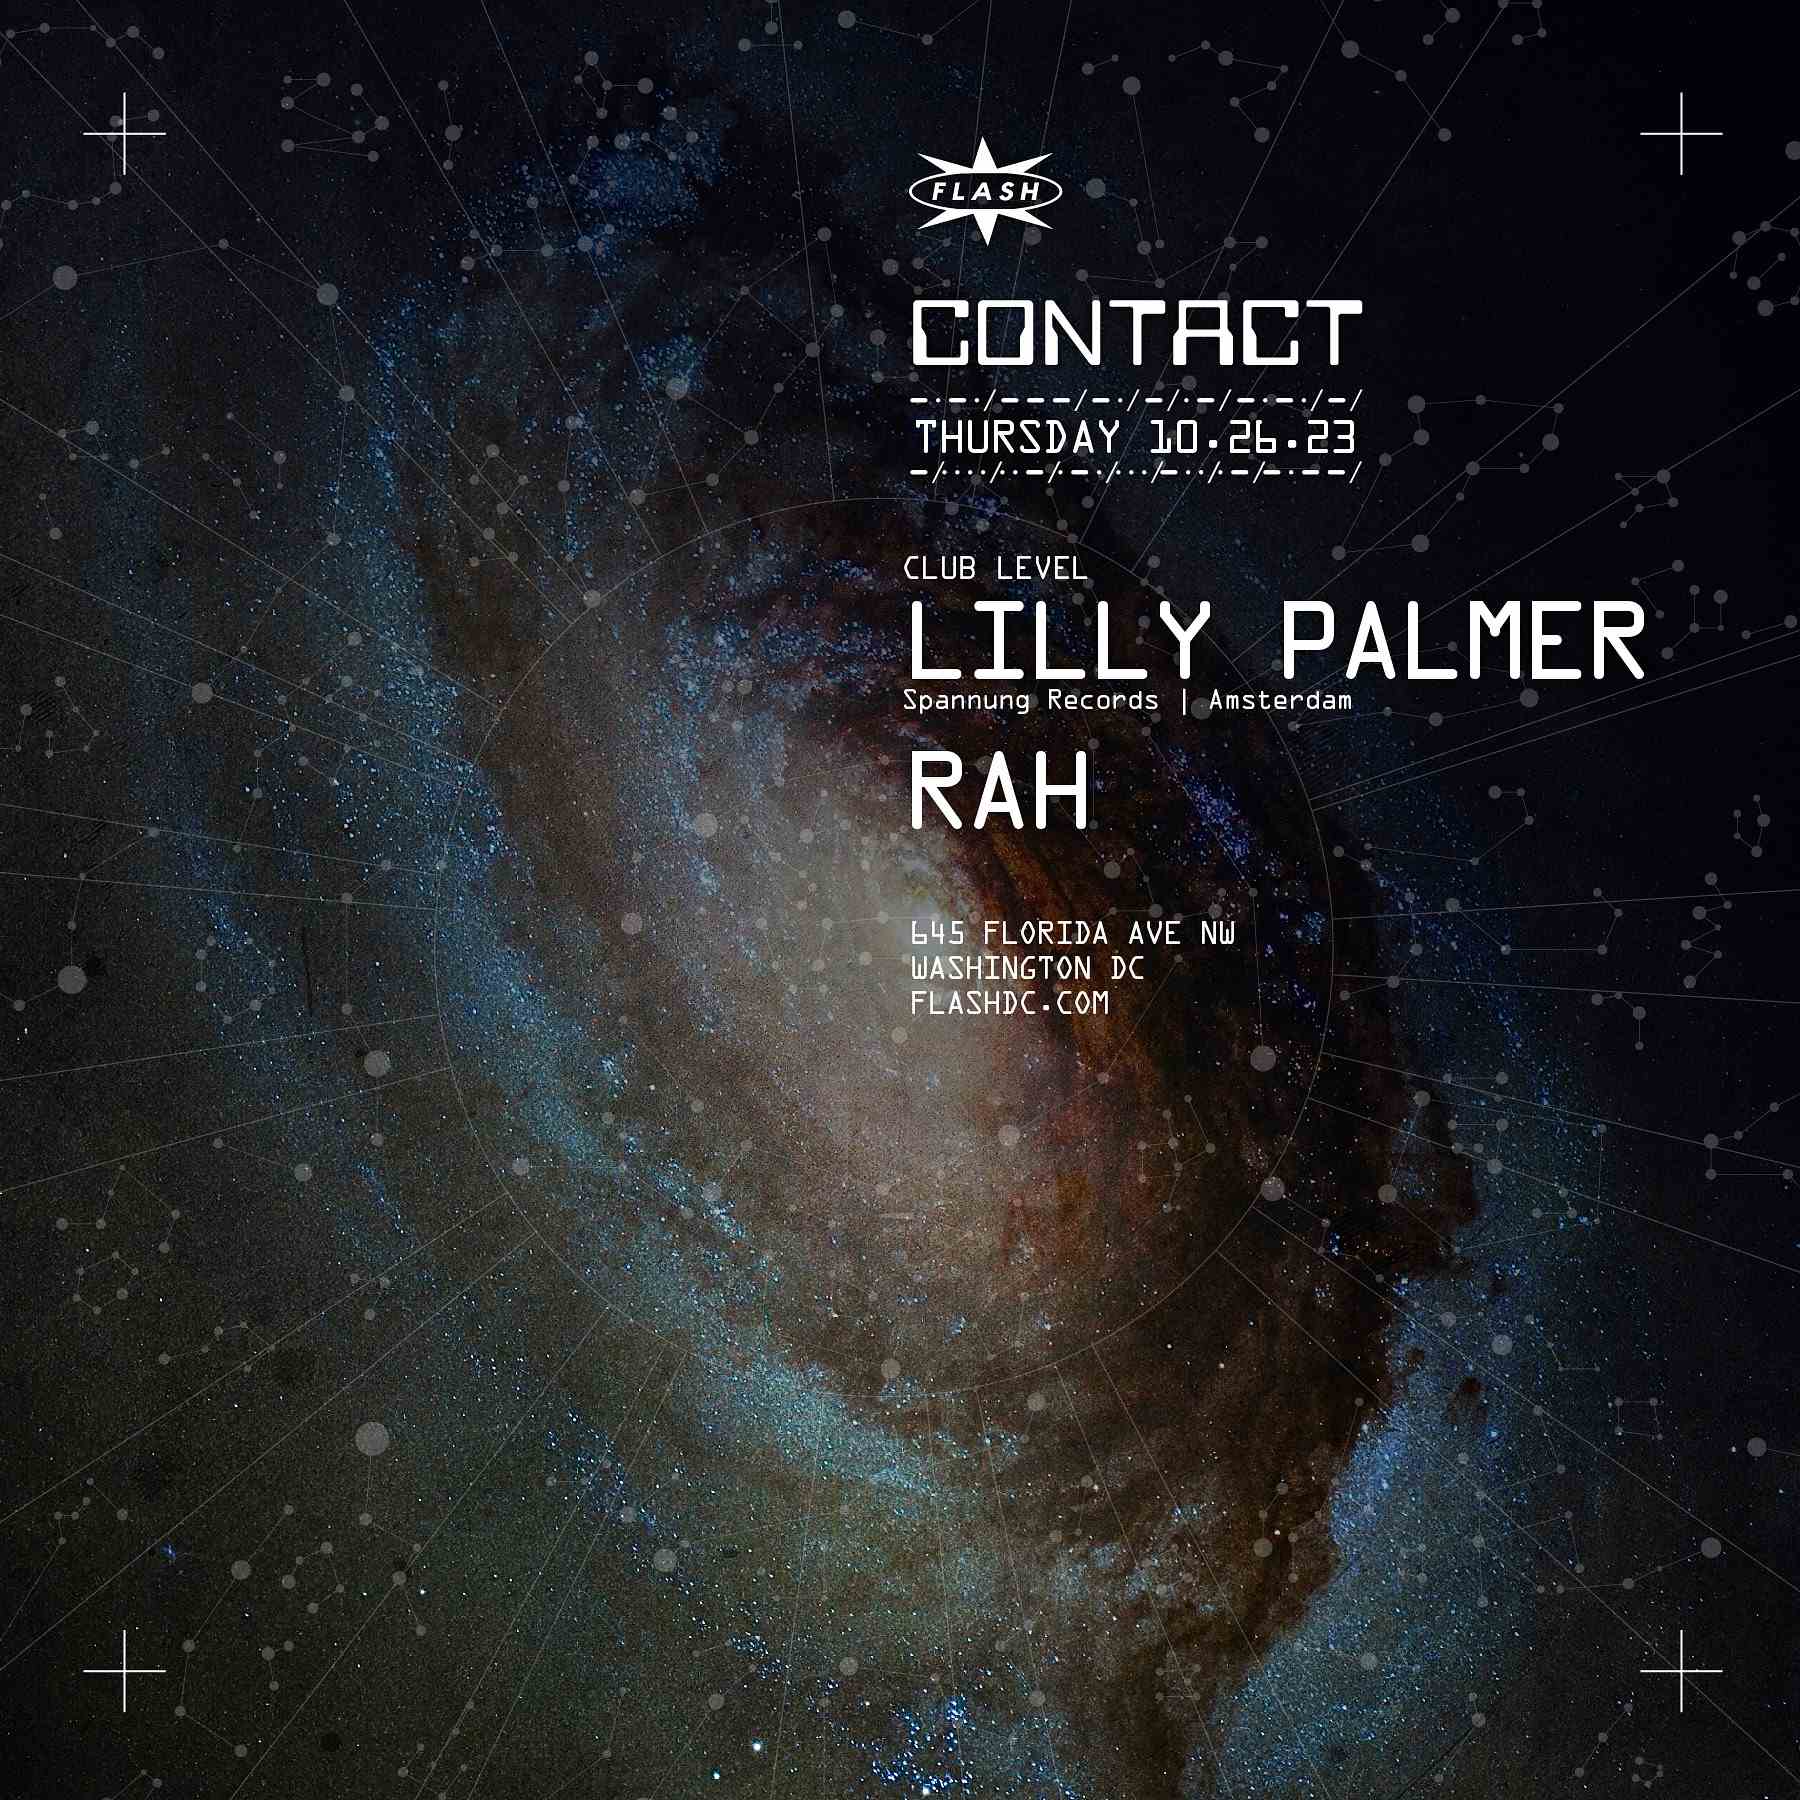 CONTACT: Lilly Palmer event flyer